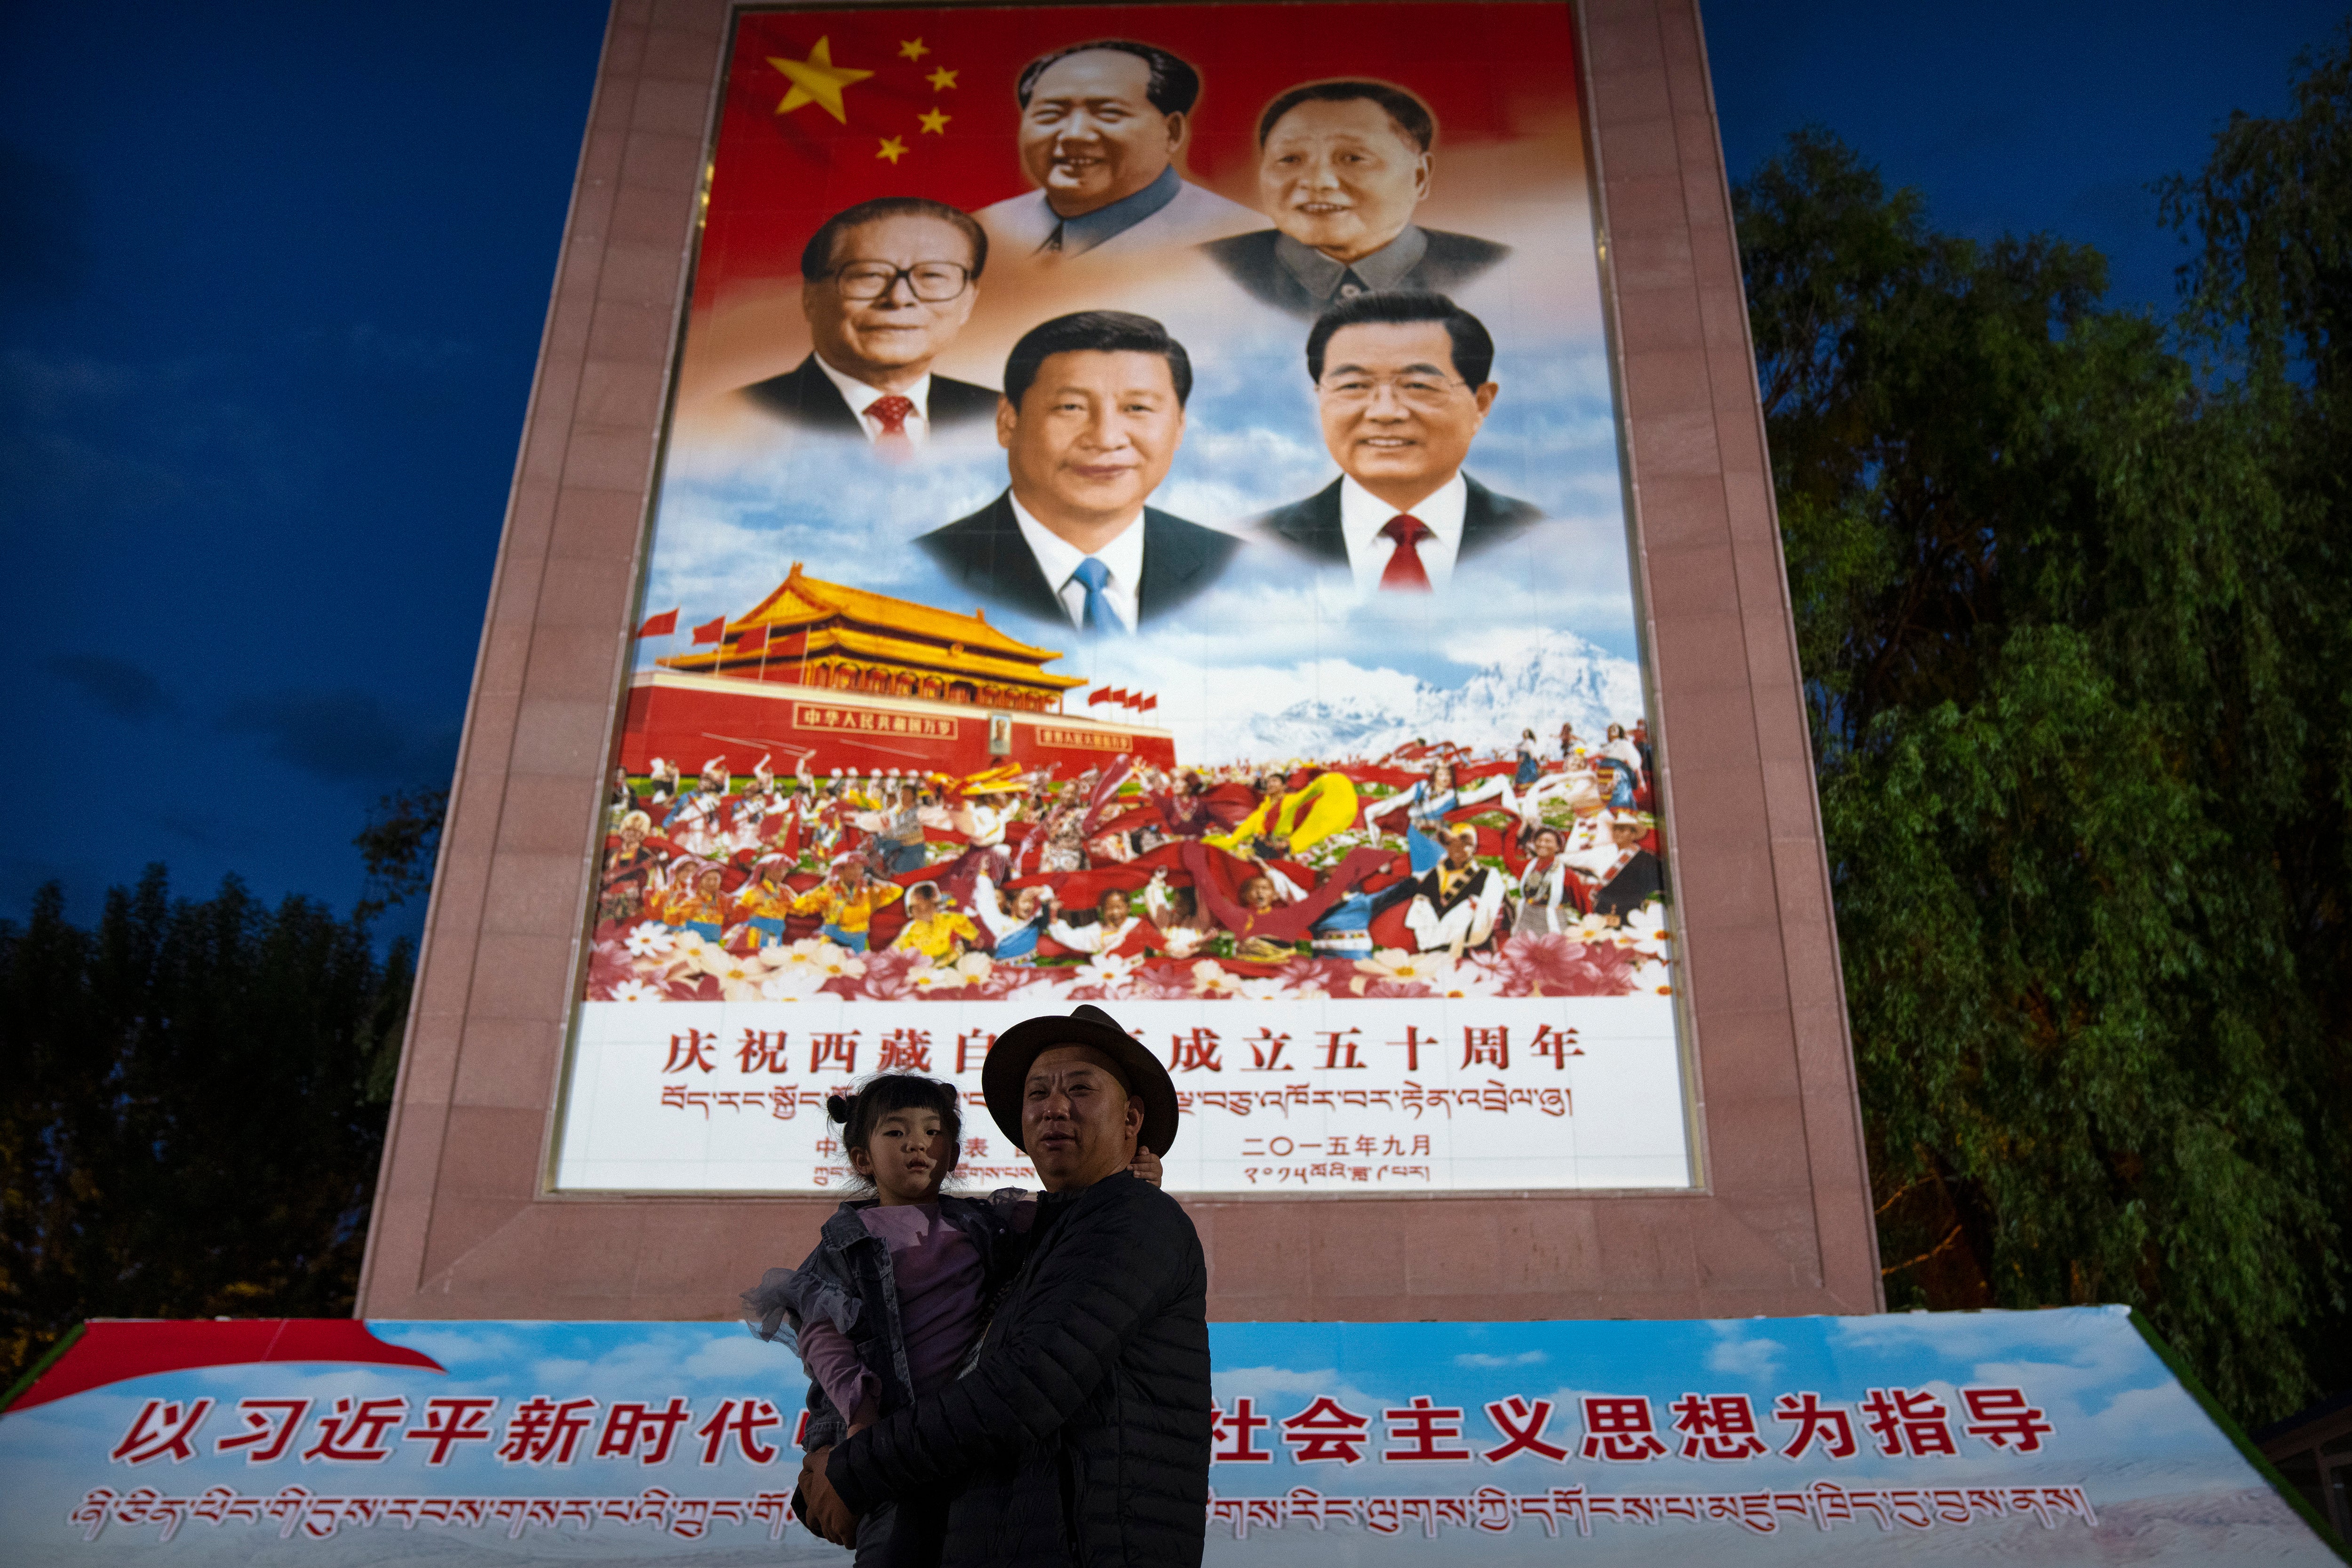 File image: A man holds a girl as they pose for a photo in front of a large mural depicting Chinese President Xi Jinping, bottom centre, and other Chinese leaders at a public square at the base of the Potala Palace in Lhasa in western China's Tibet Autonomous Region on 1 June, 2021.